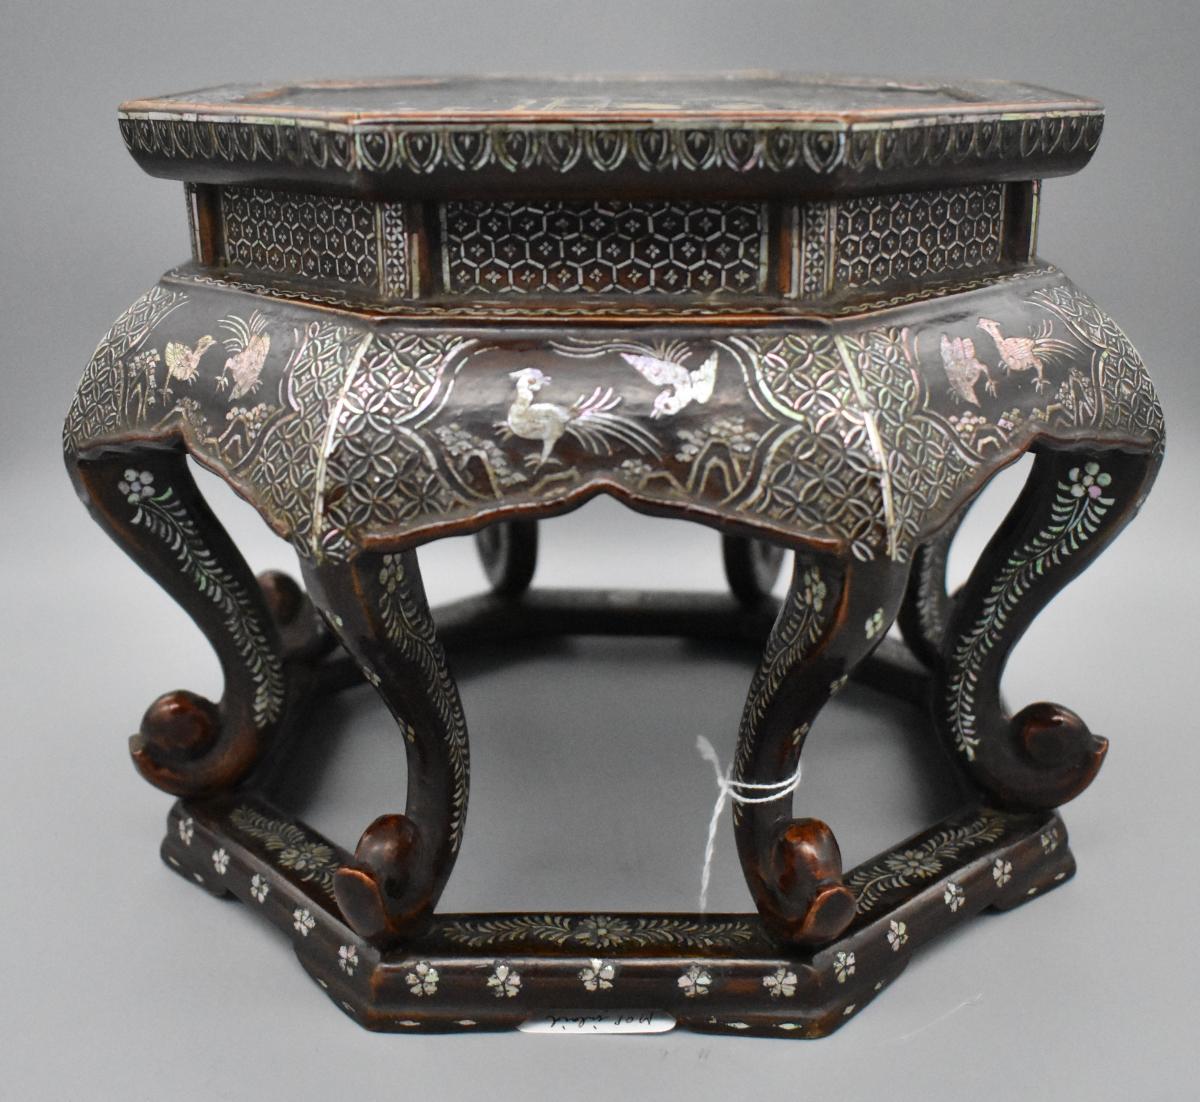 Octagonal Lacquer stand